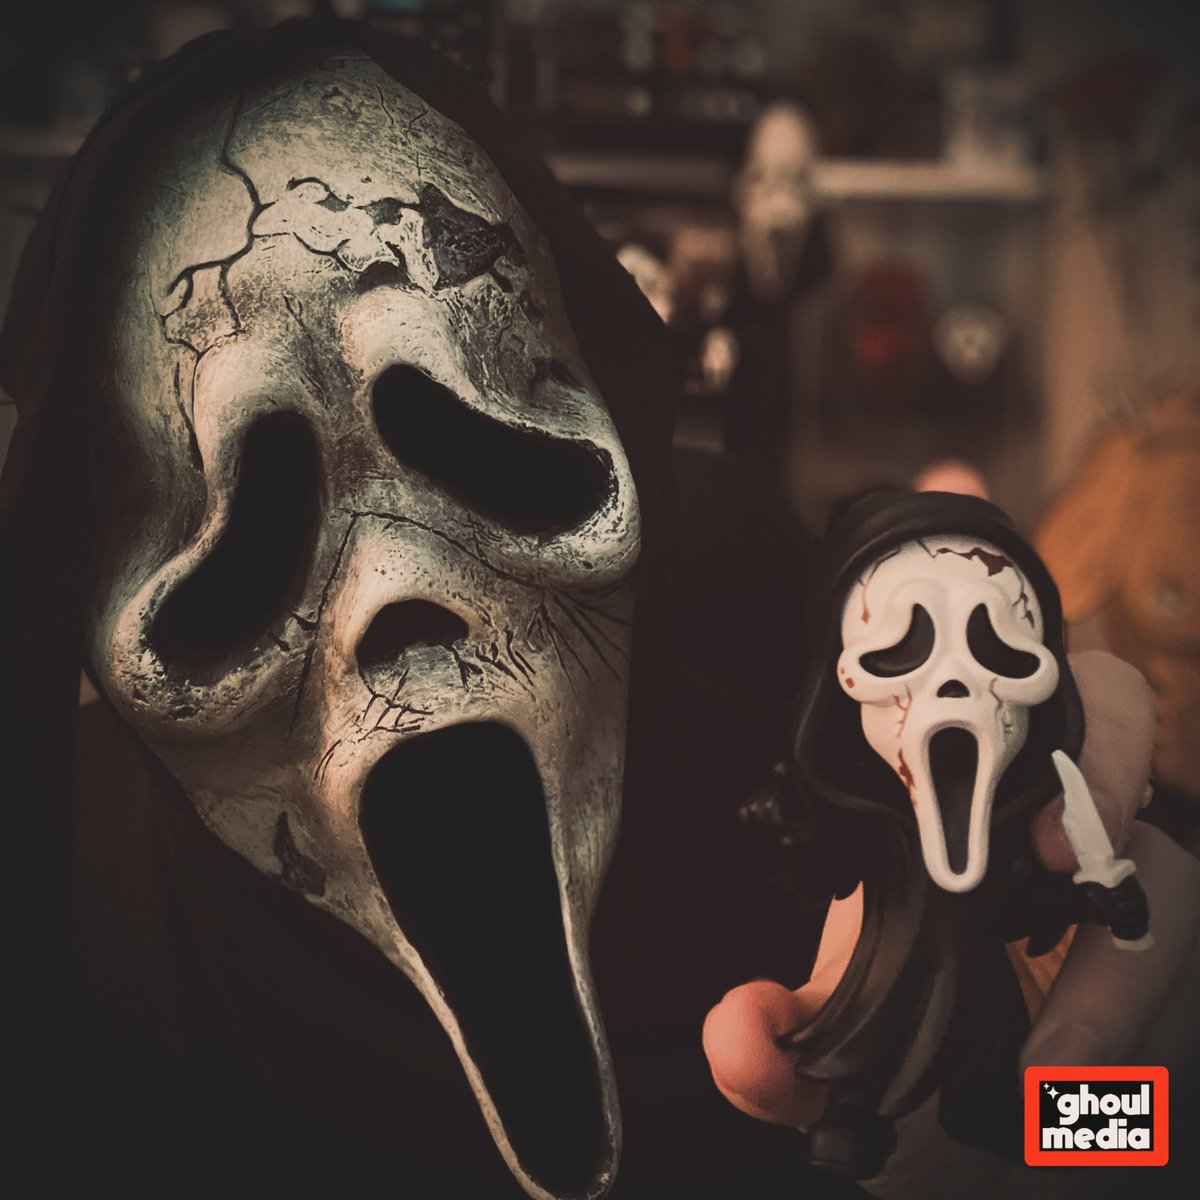 'This is long overdue.' 🔪

#GhoulMedia #GhostFace #Scream #Horror #HorrorMovies #HorrorCommunity #HorrorCosplay #Cosplay #FunWorld #HorrorCollection